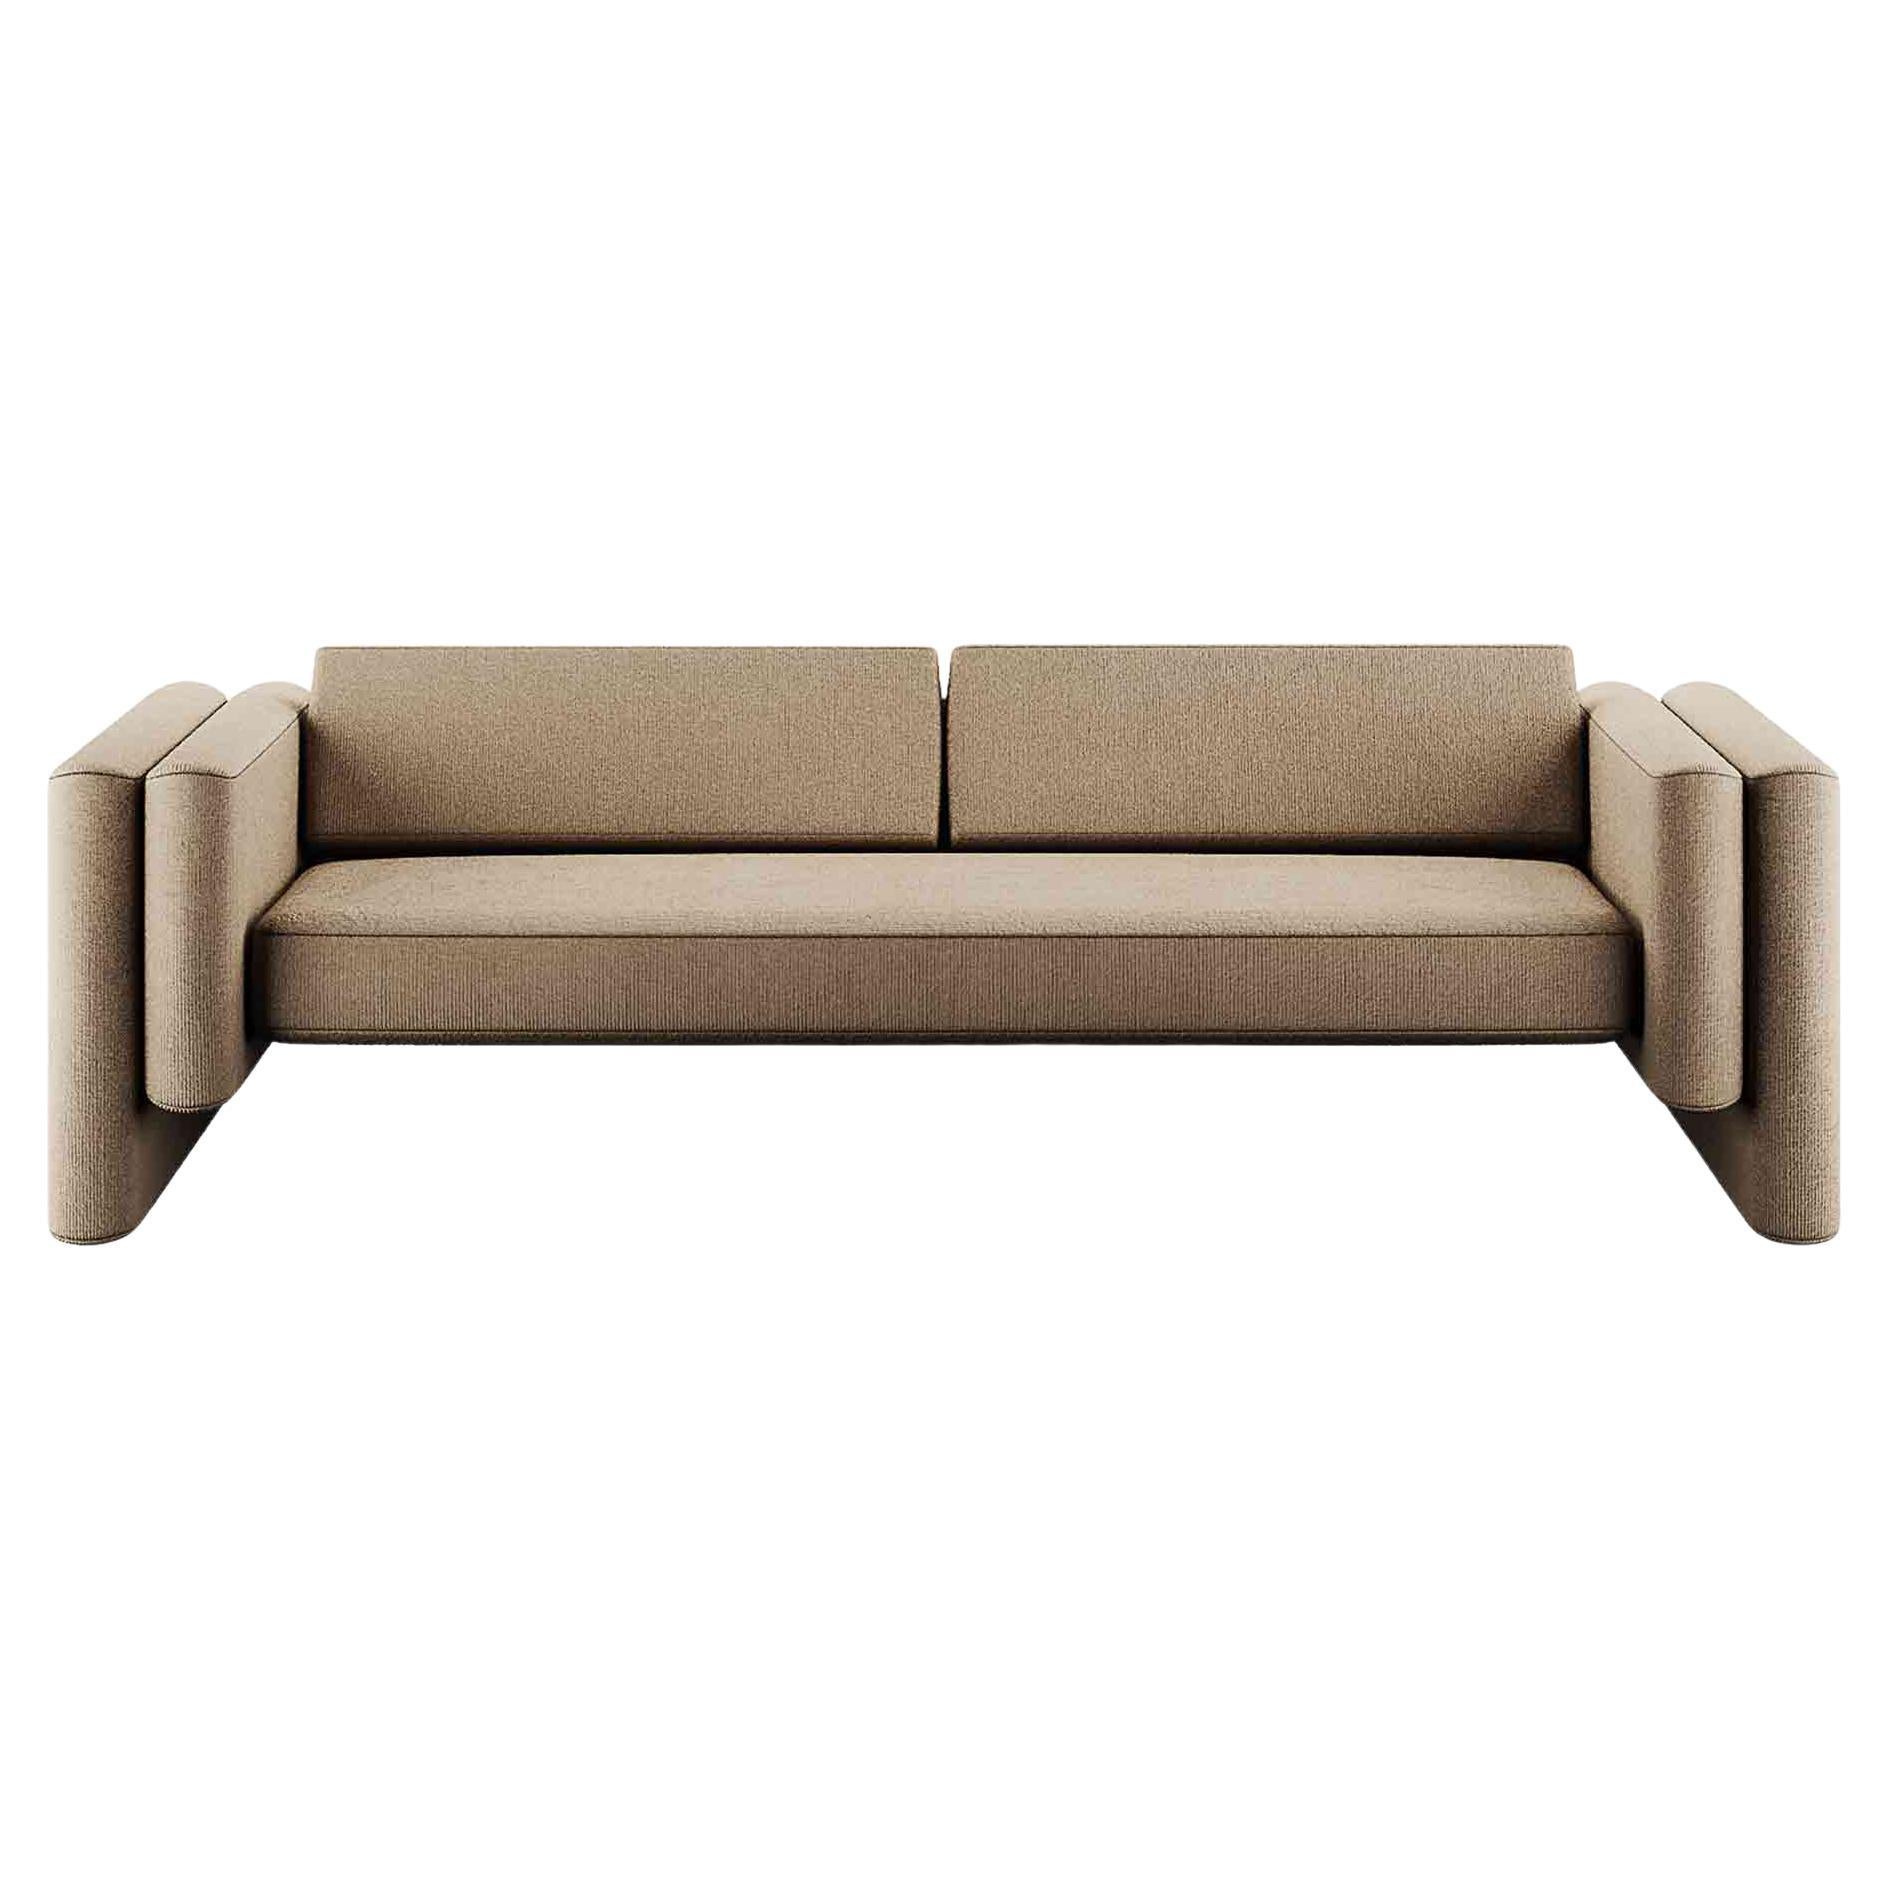 Modern Minimal Sofa with Clean Lines & Beige Corduroy Upholstery For Sale